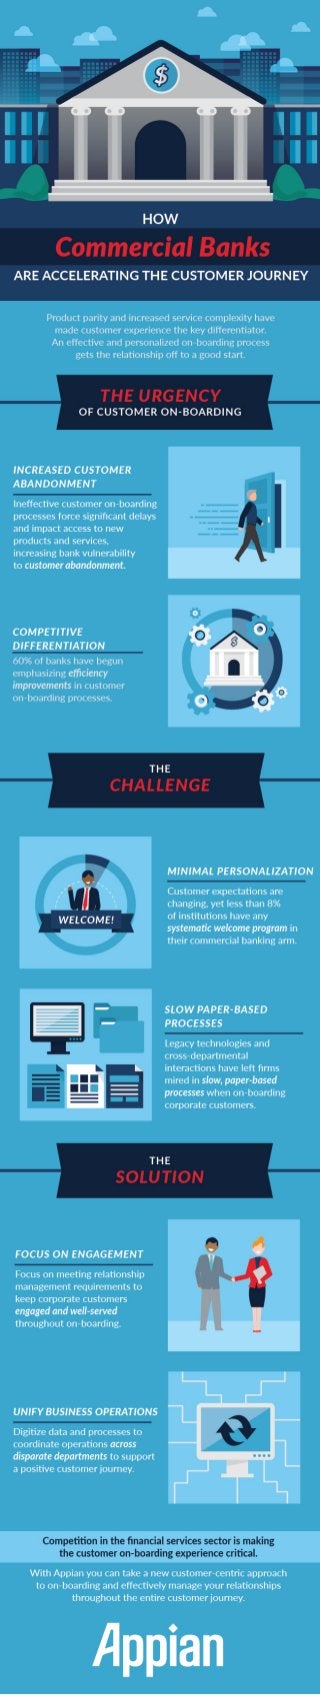 [Infographic] How Commercial Banks Are Accelerating the Customer Journey